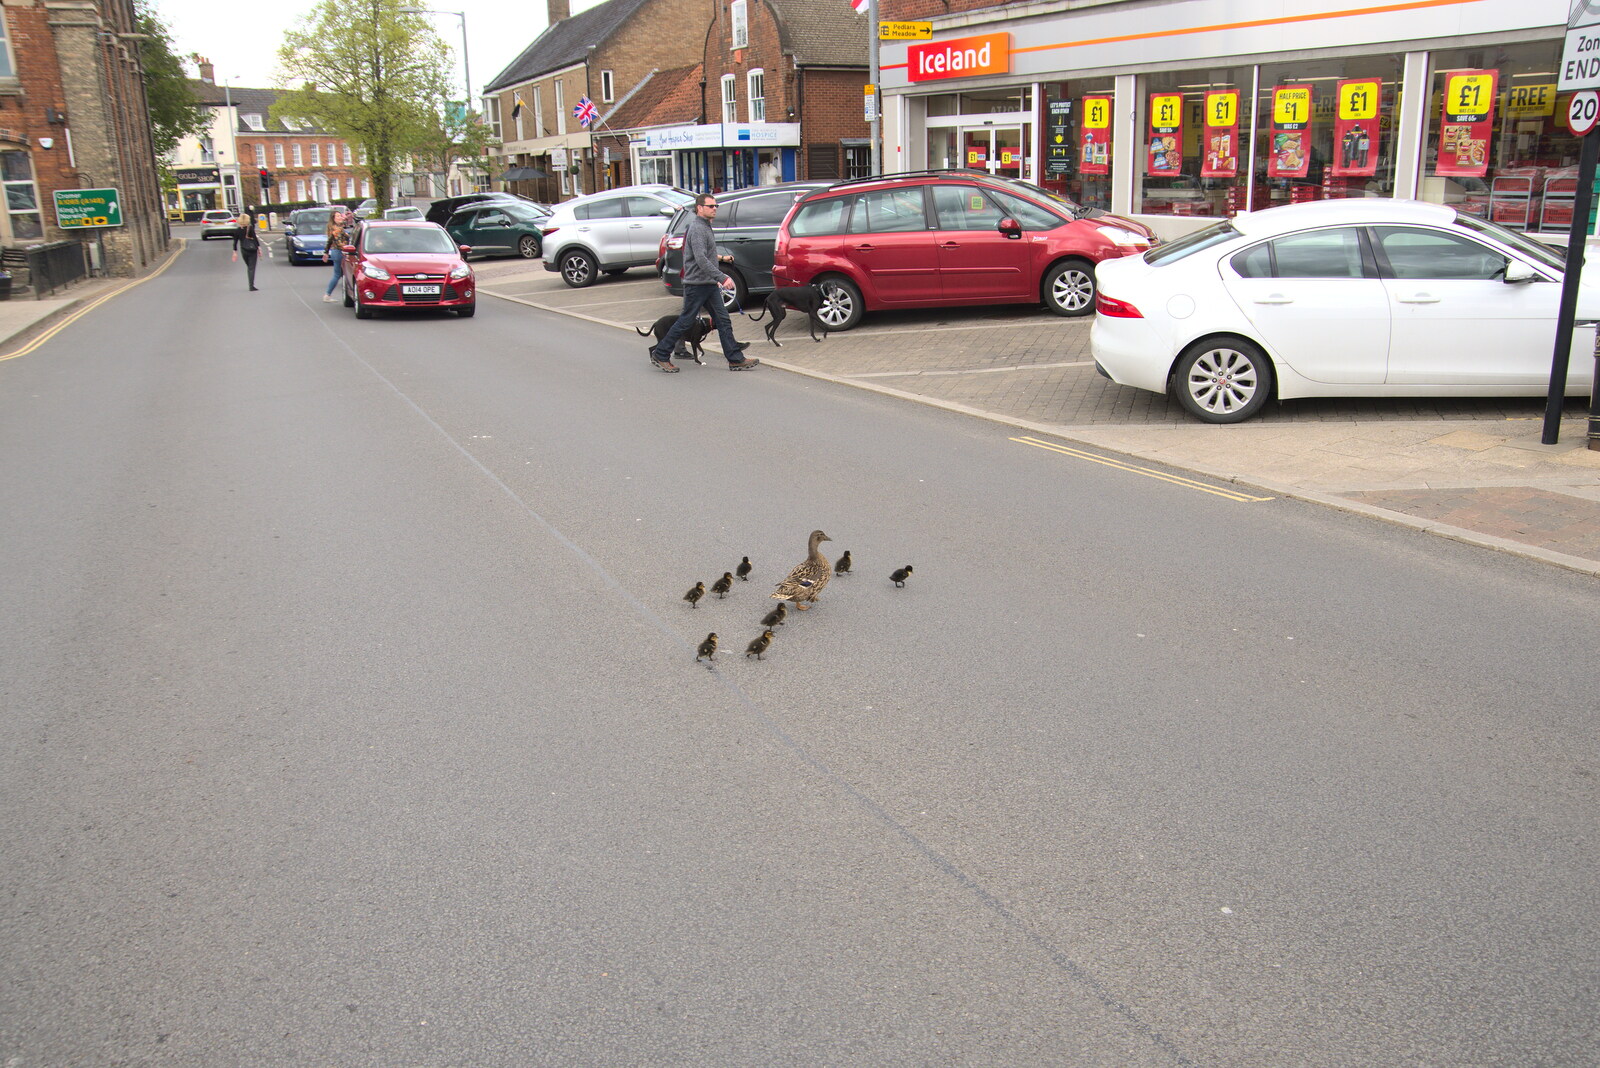 The traffic is stopped by the crossing ducks from A Vaccination Afternoon, Swaffham, Norfolk - 9th May 2021